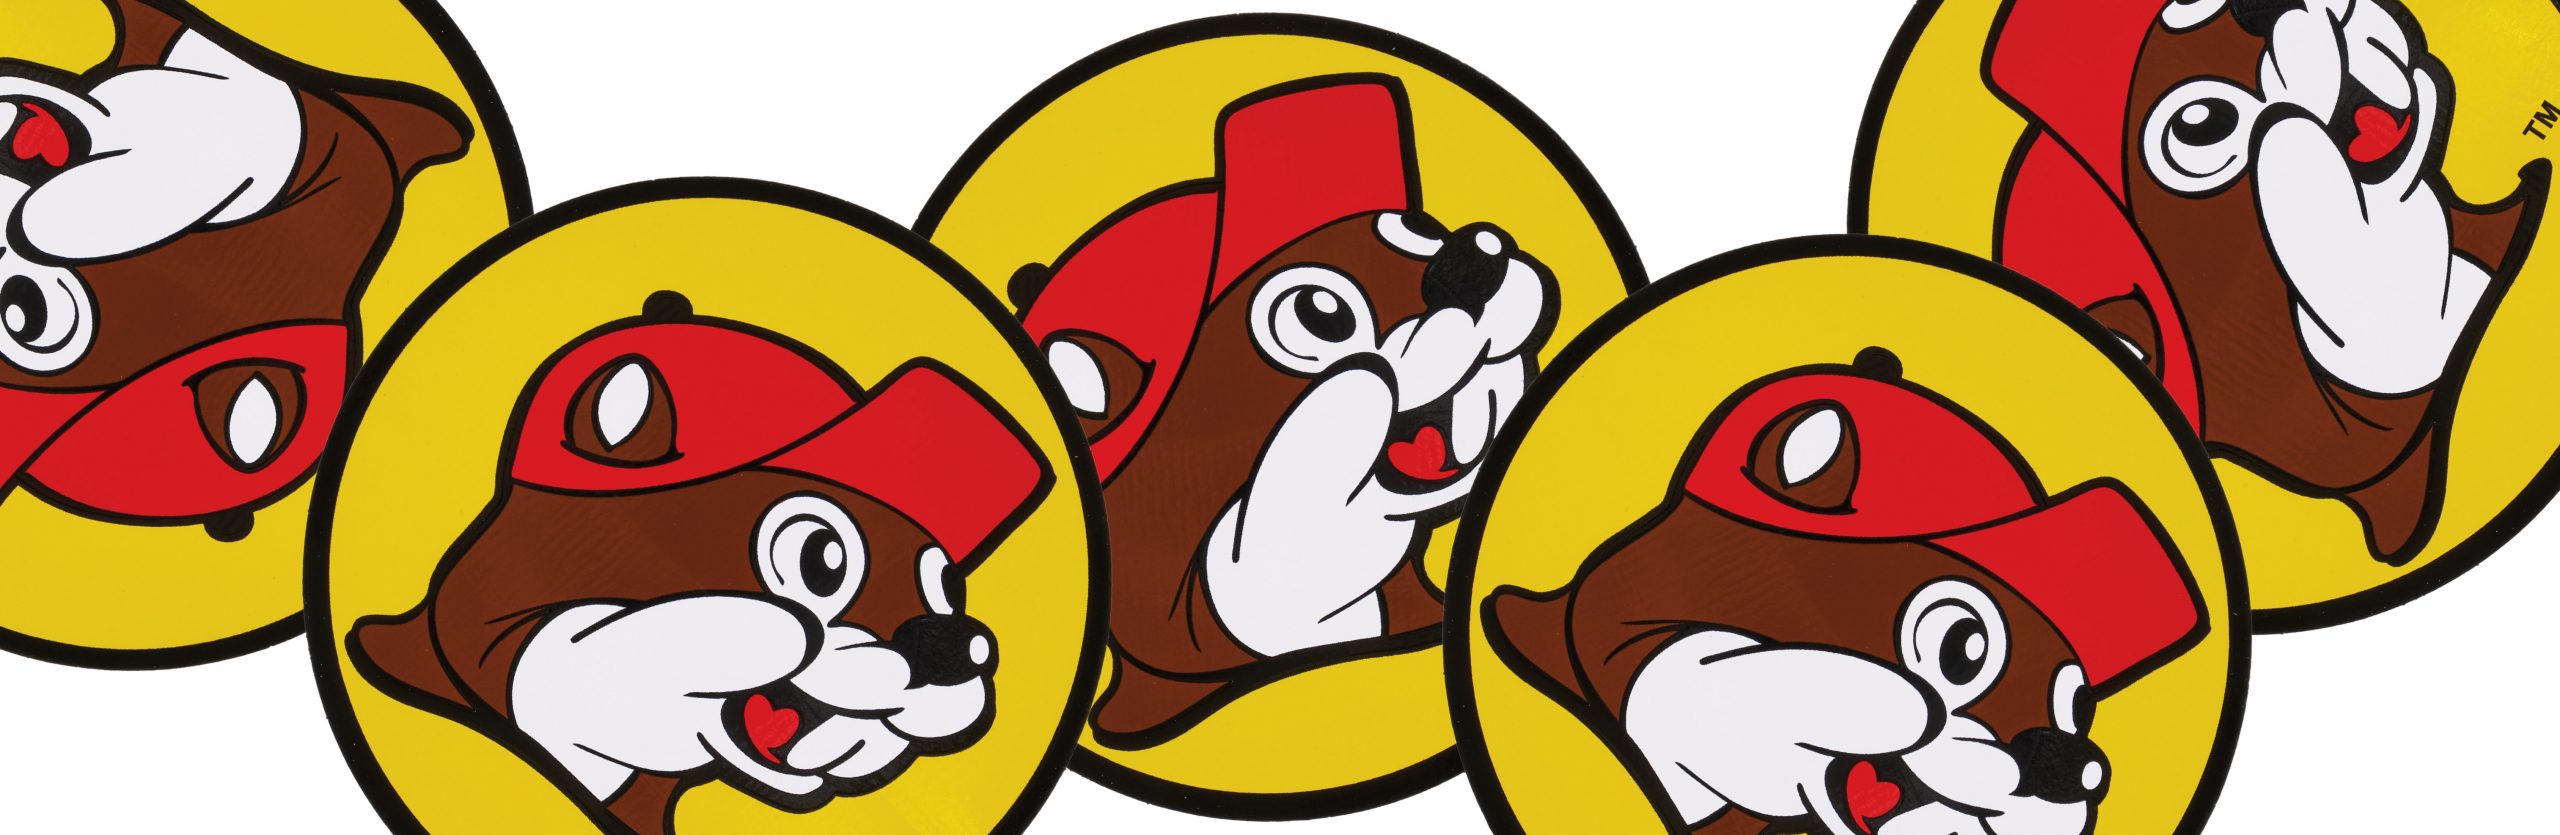 A collection of bright yellow bumper stickers with Buc-ee Beaver